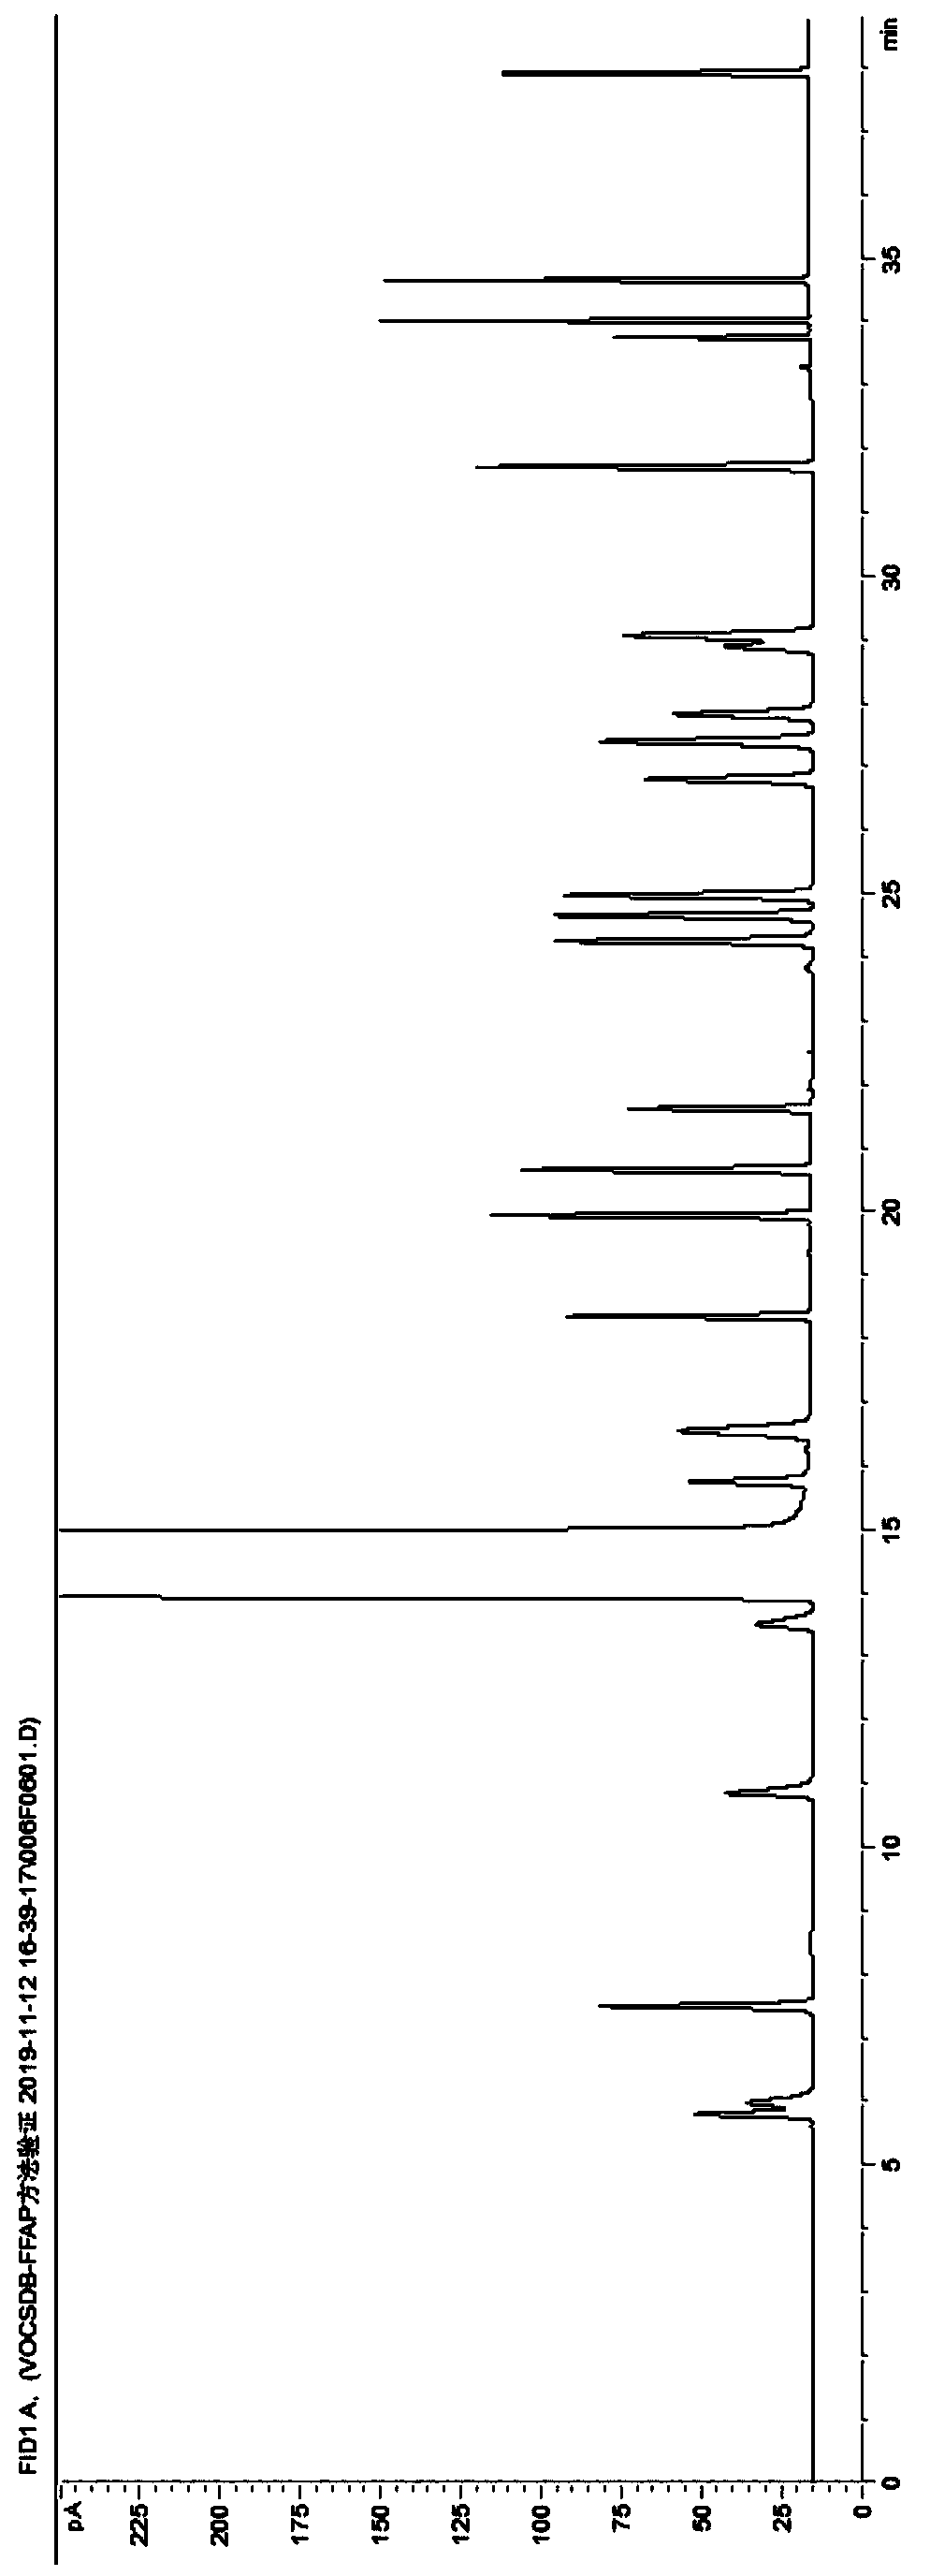 Method for determining volatile organic compounds in stationary pollution source